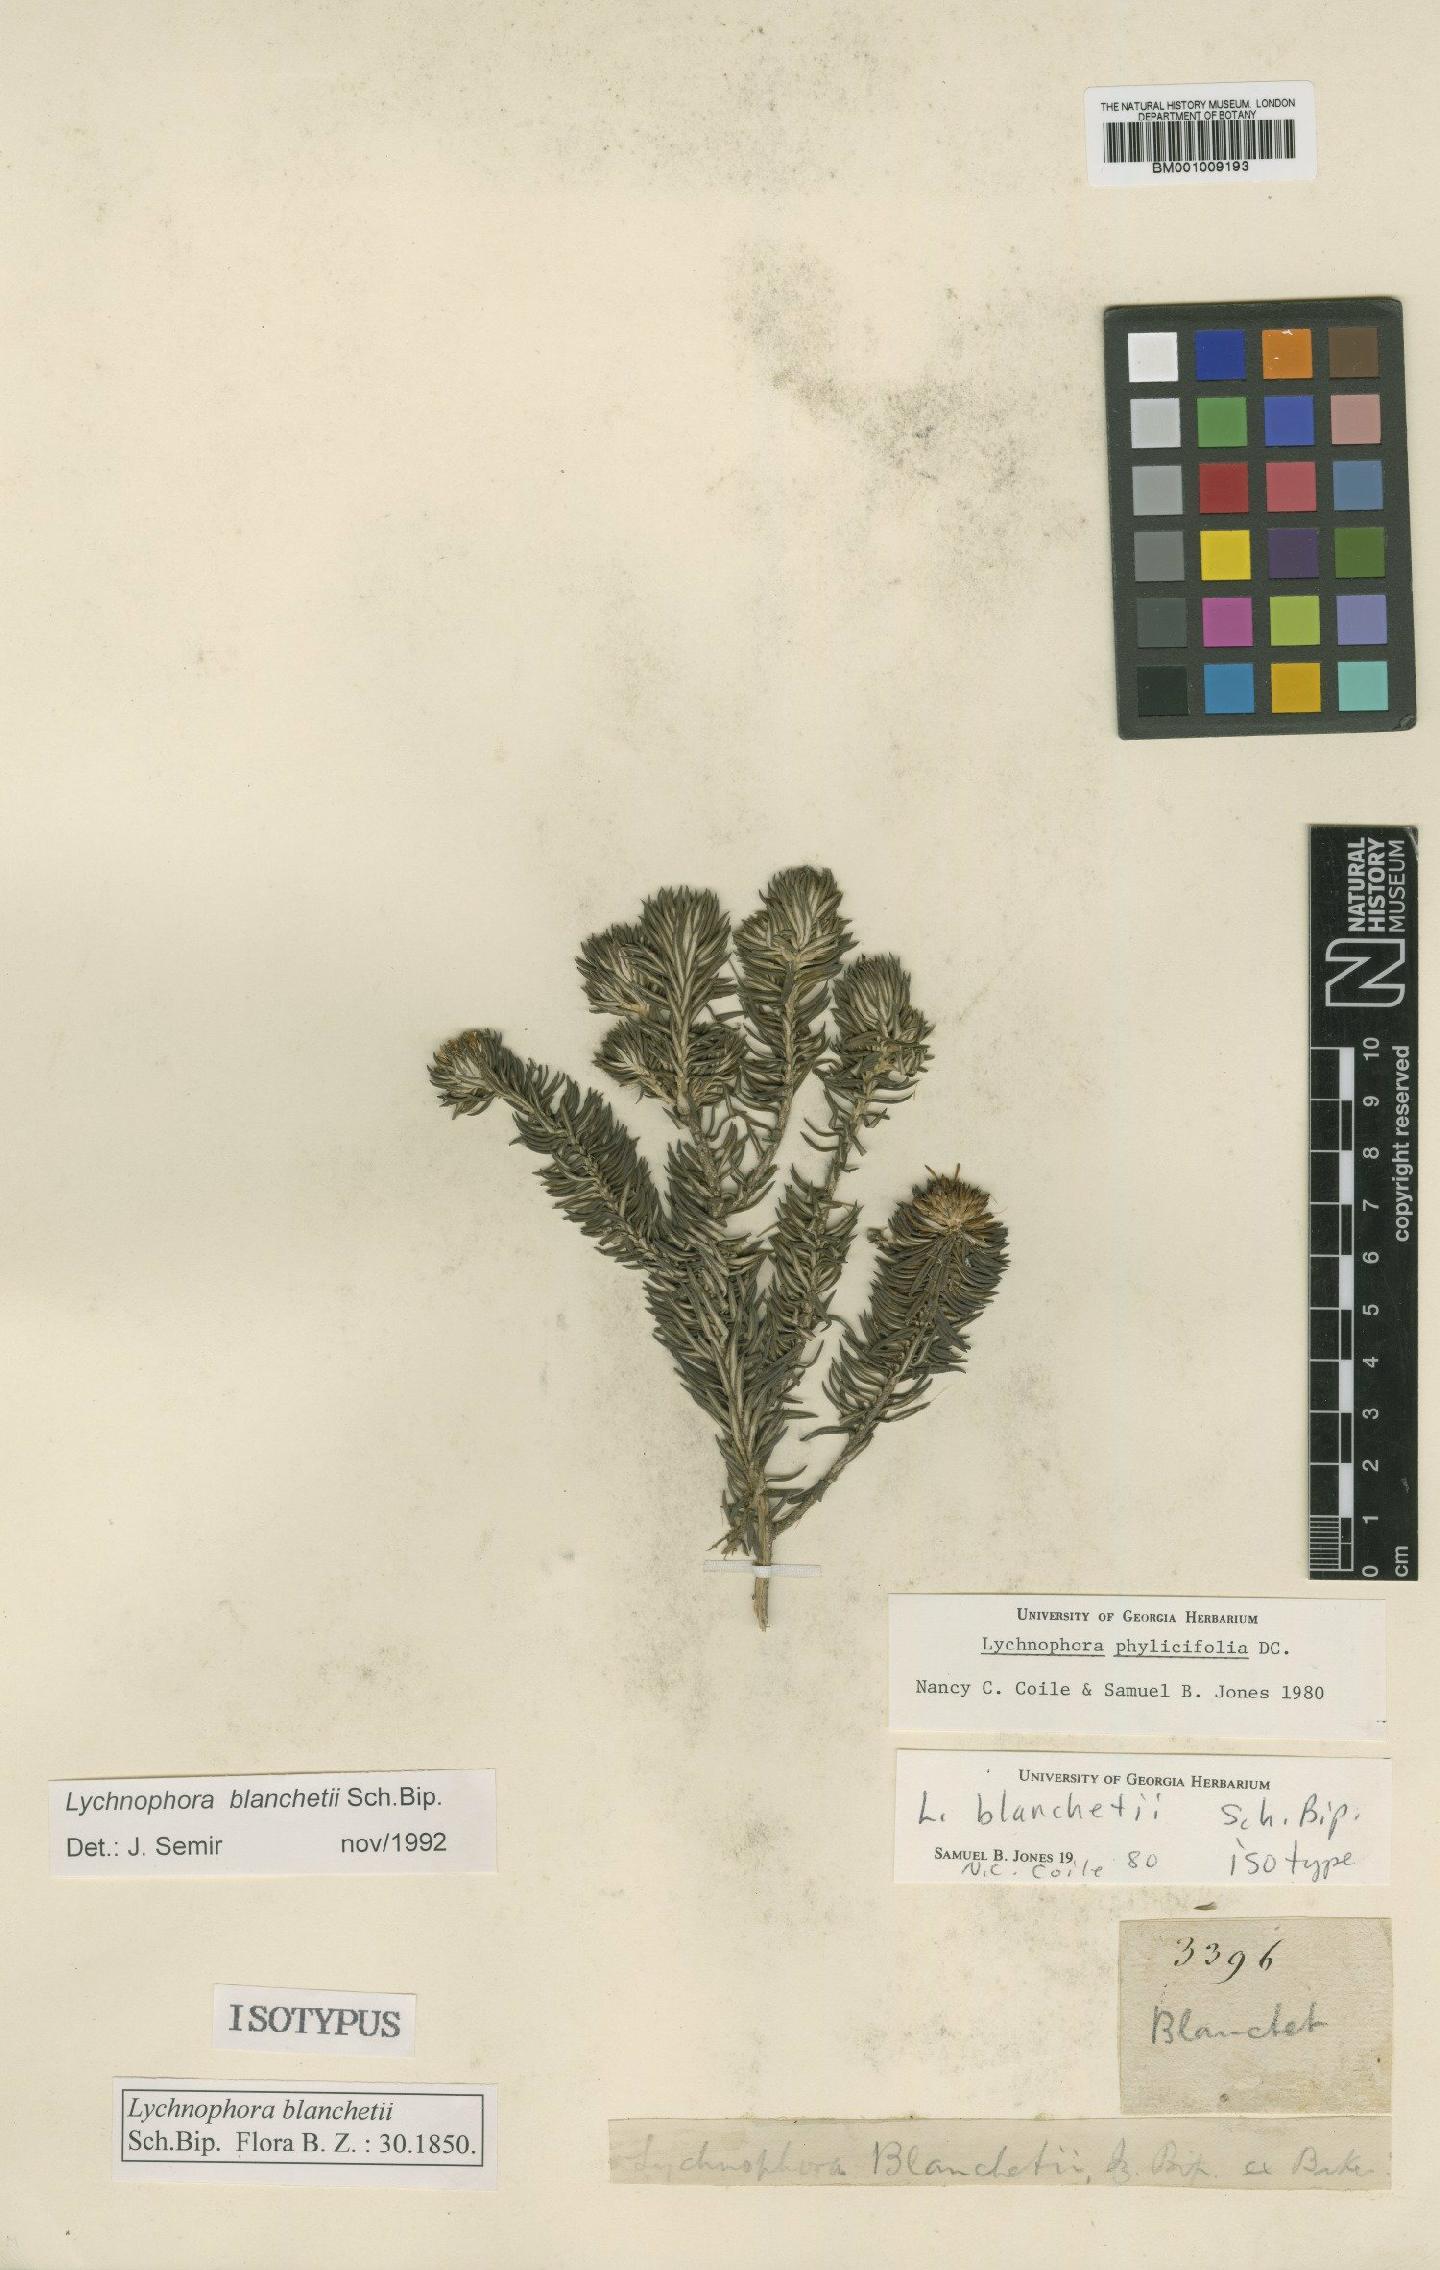 To NHMUK collection (Lychnophora blanchetii Sch.Bip.; Isotype; NHMUK:ecatalogue:557230)